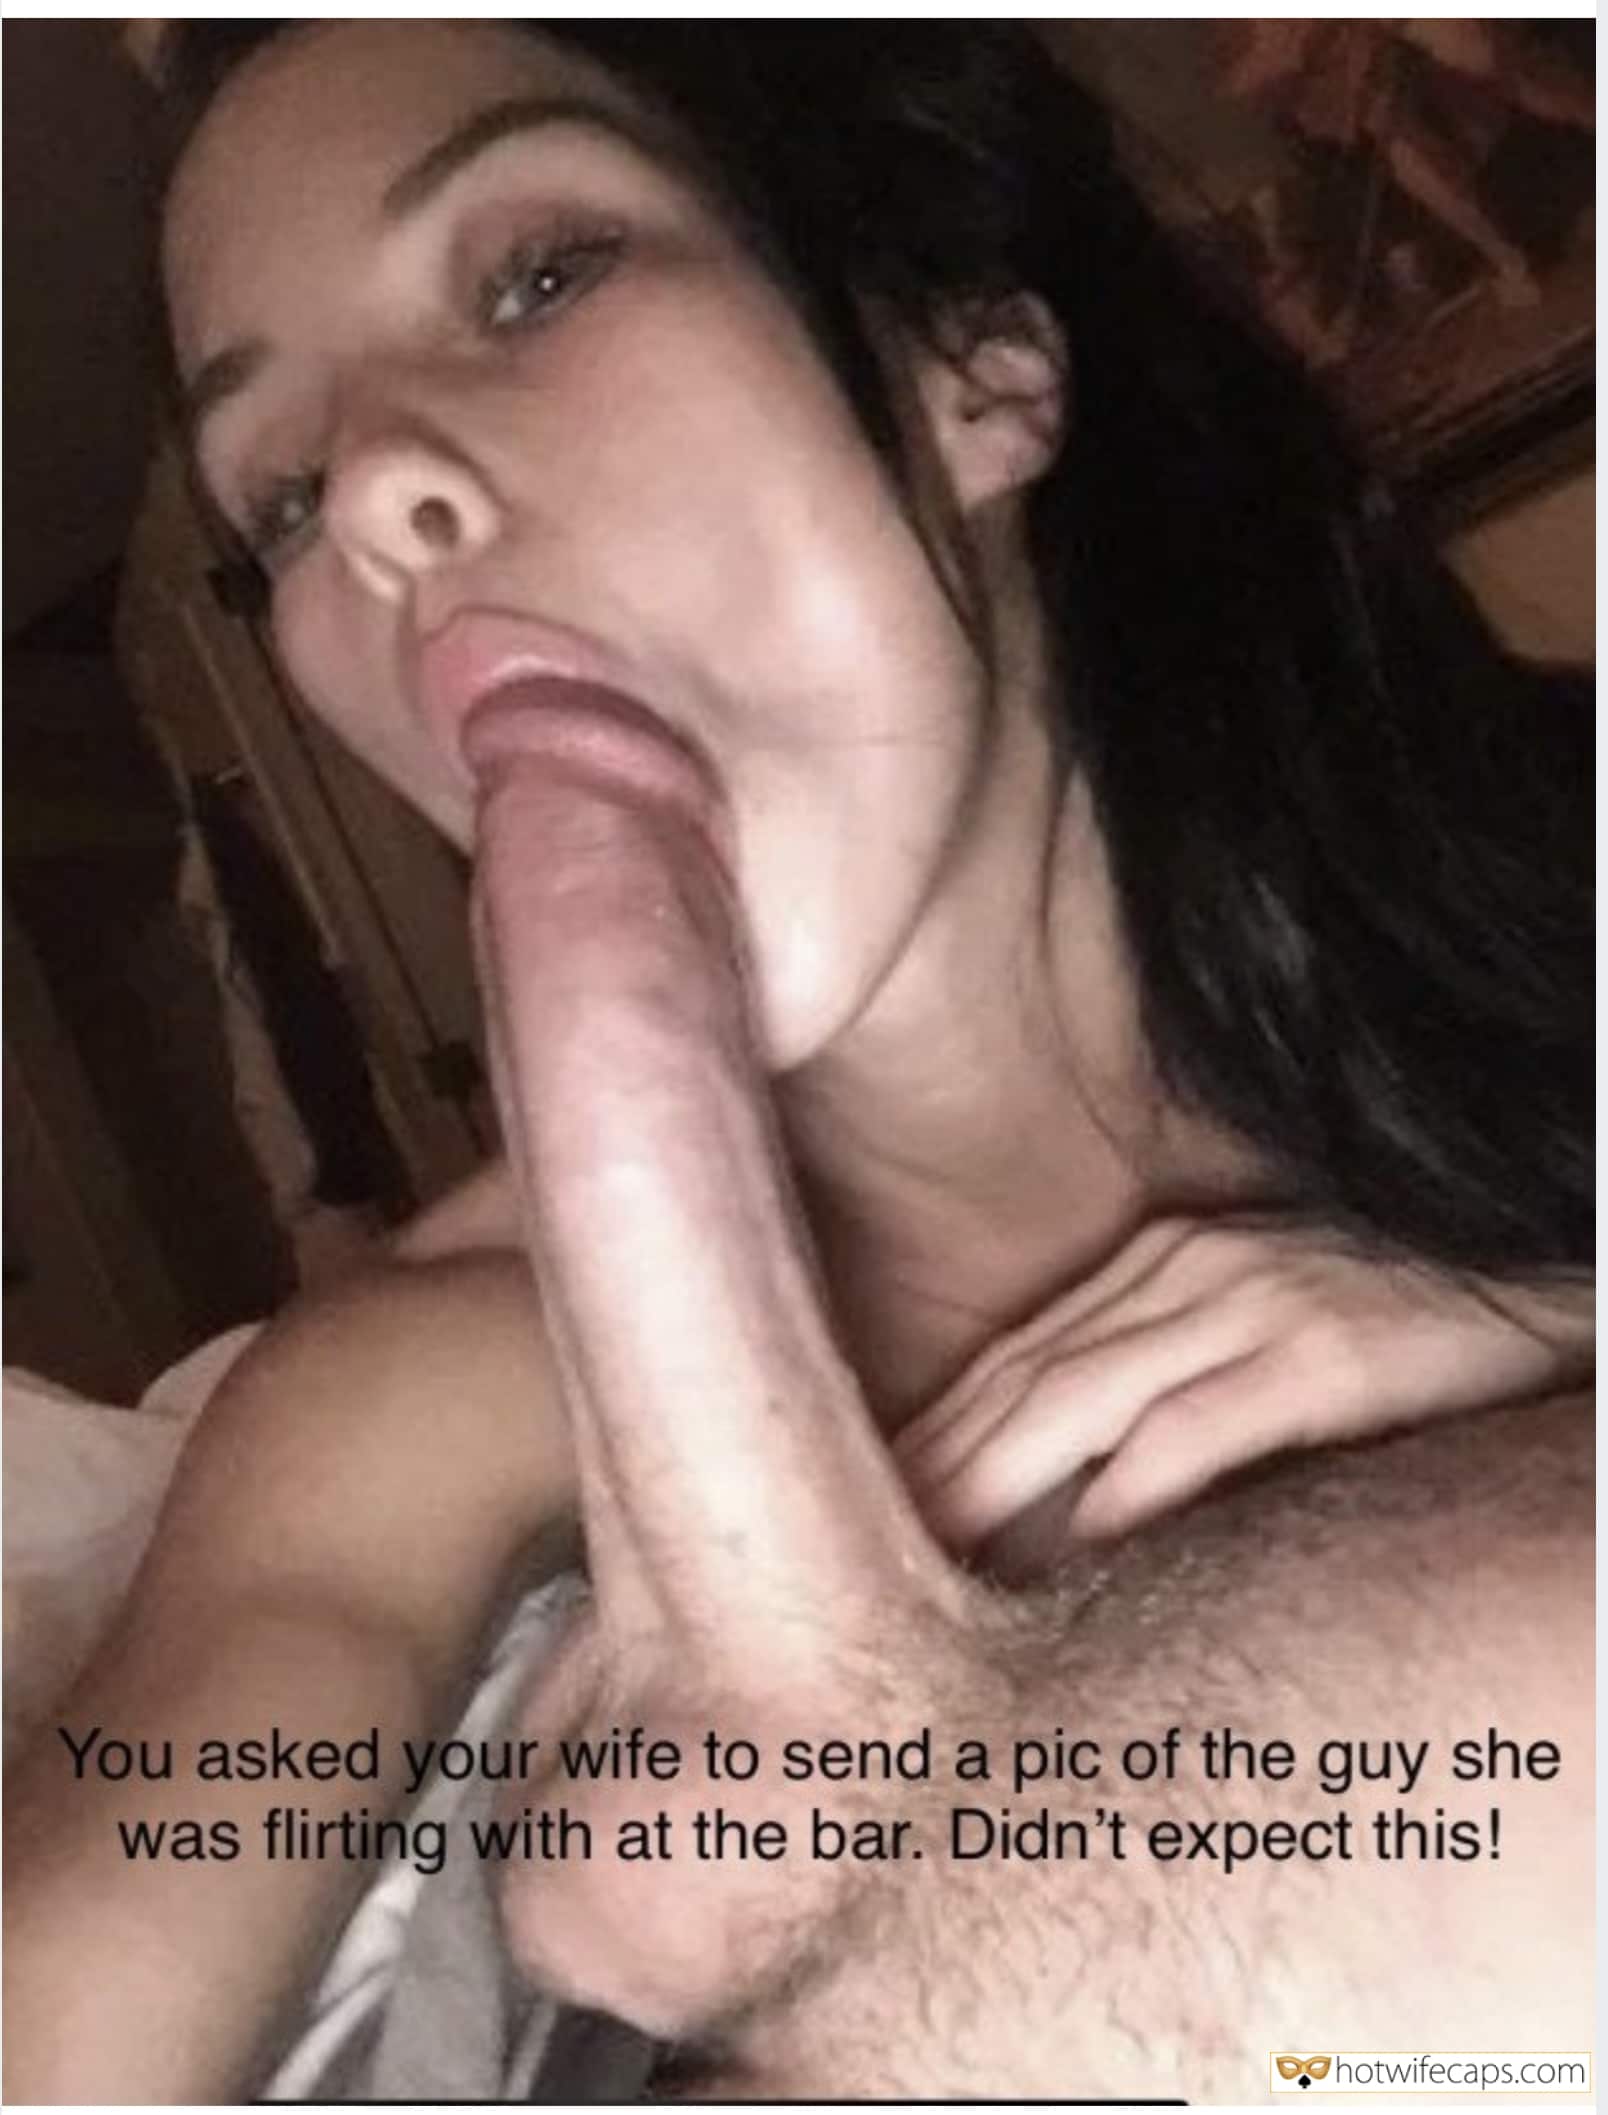 Cheating Blowjob Bigger Cock hotwife caption: You asked your wife to send a pic of the guy she was flirting with at the bar. Didn’t expect this! hotwife online flirt caption Sucking His Big Pulsating Dick Head